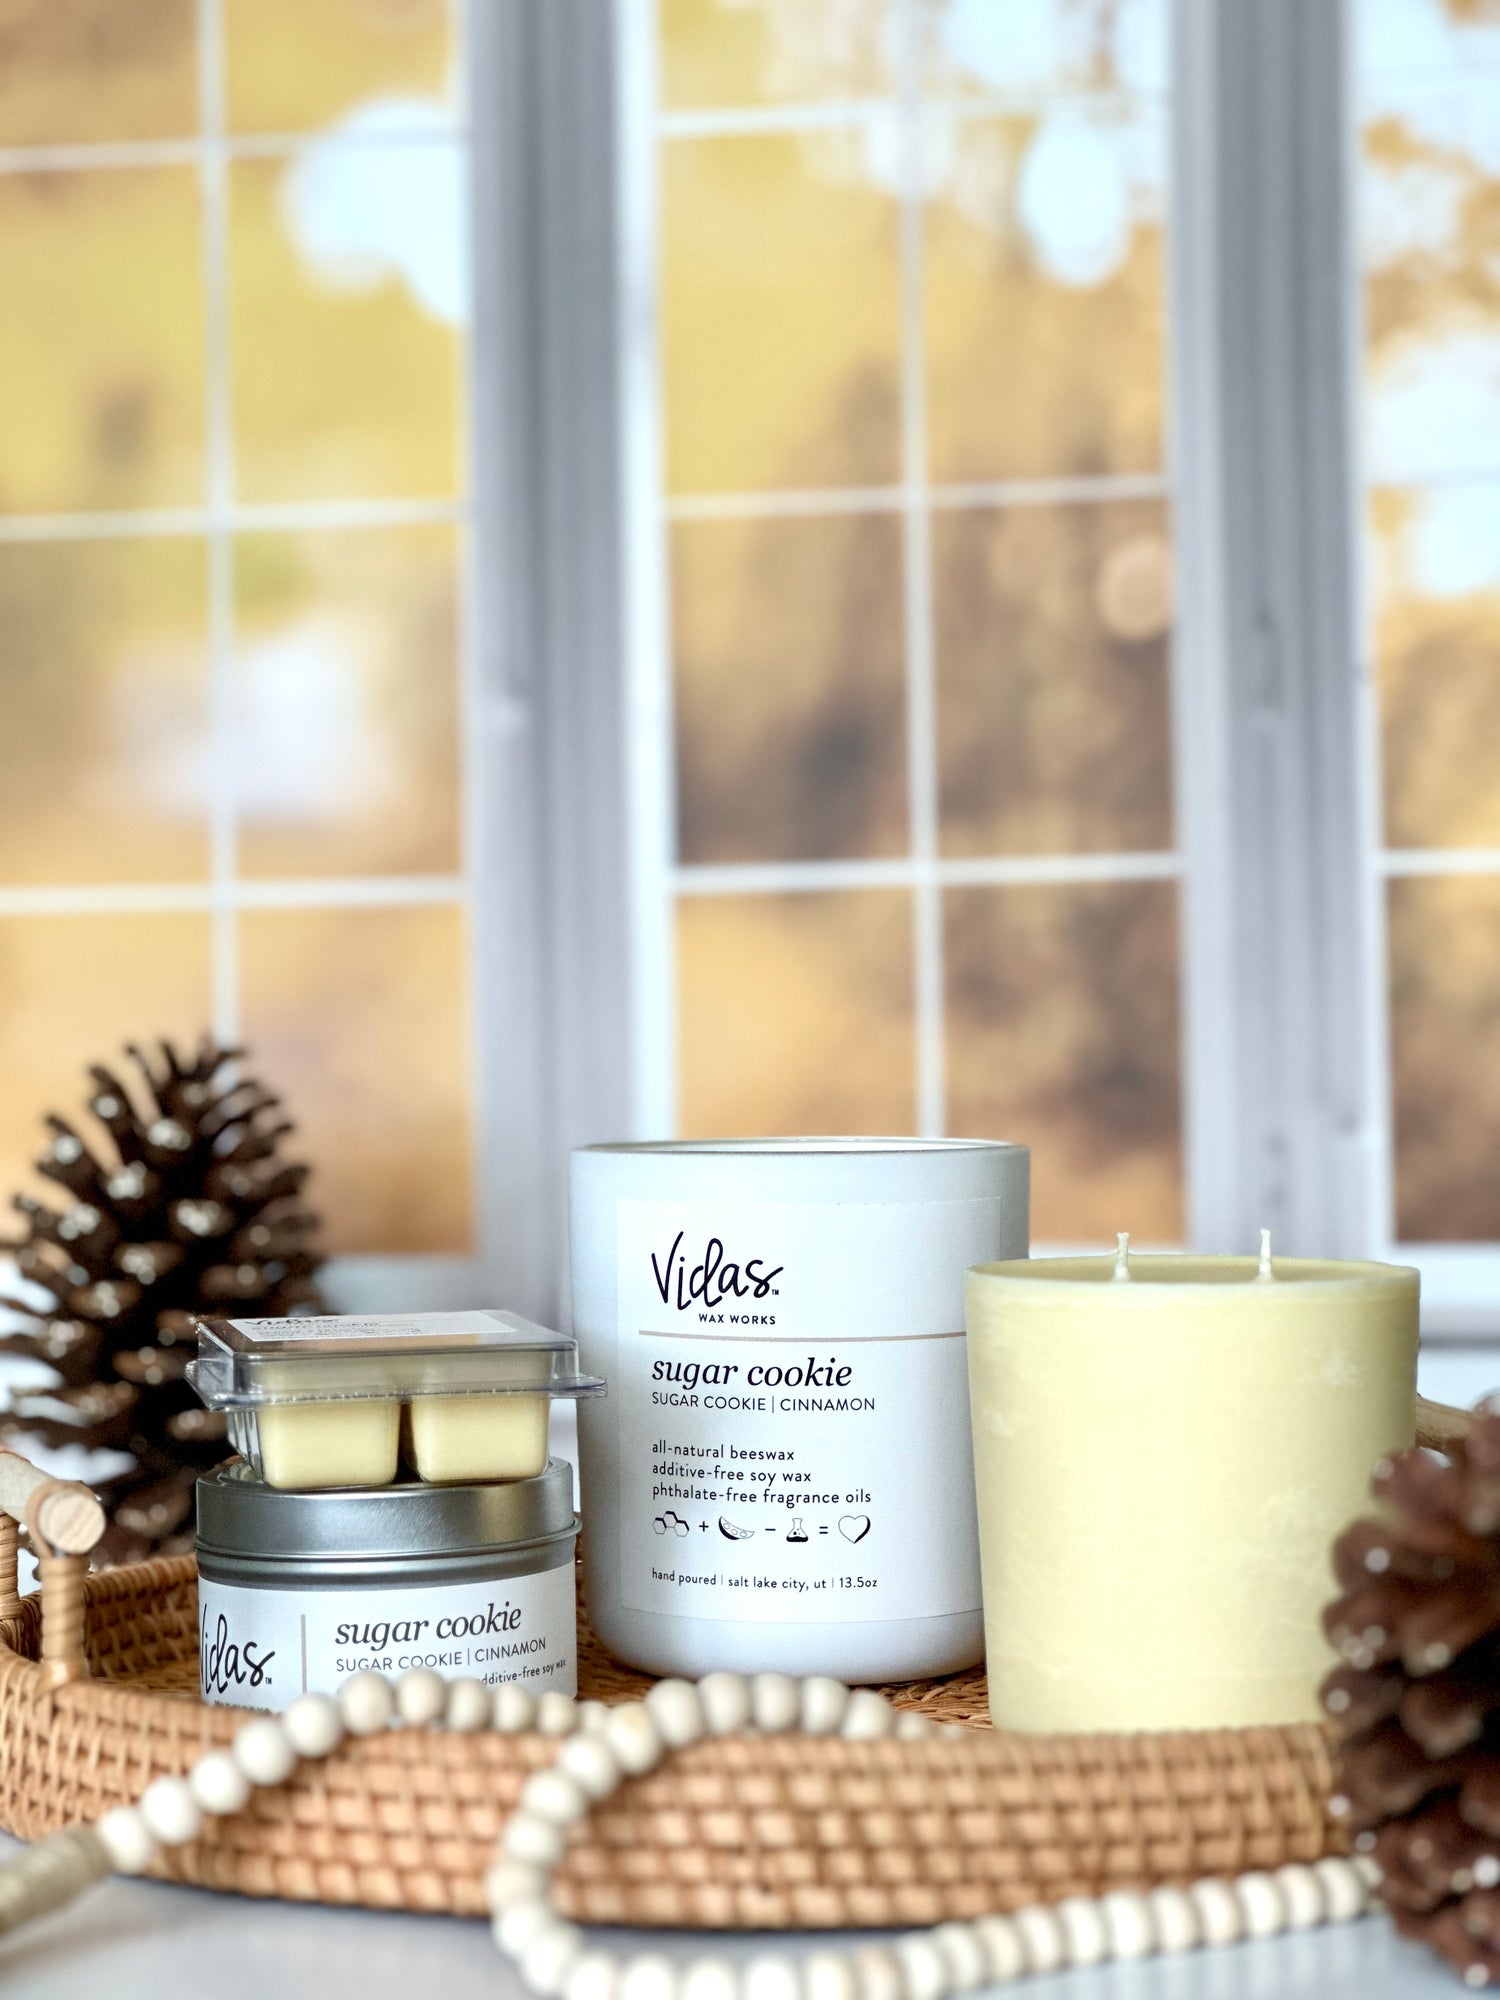 Embrace the autumn ambience with our “Sugar Cookie” scent, a delightful blend of sugar cookie and cinnamon. Against a backdrop of blurred fall-colored leaves outside a window, the collection features a range of offerings: a 13.5oz candle in a chic matte white jar, a 13.5oz candle refill, a compact 3.5oz candle tin, and dainty 2.5oz wax melts. A symphony of scents to elevate your seasonal moments.